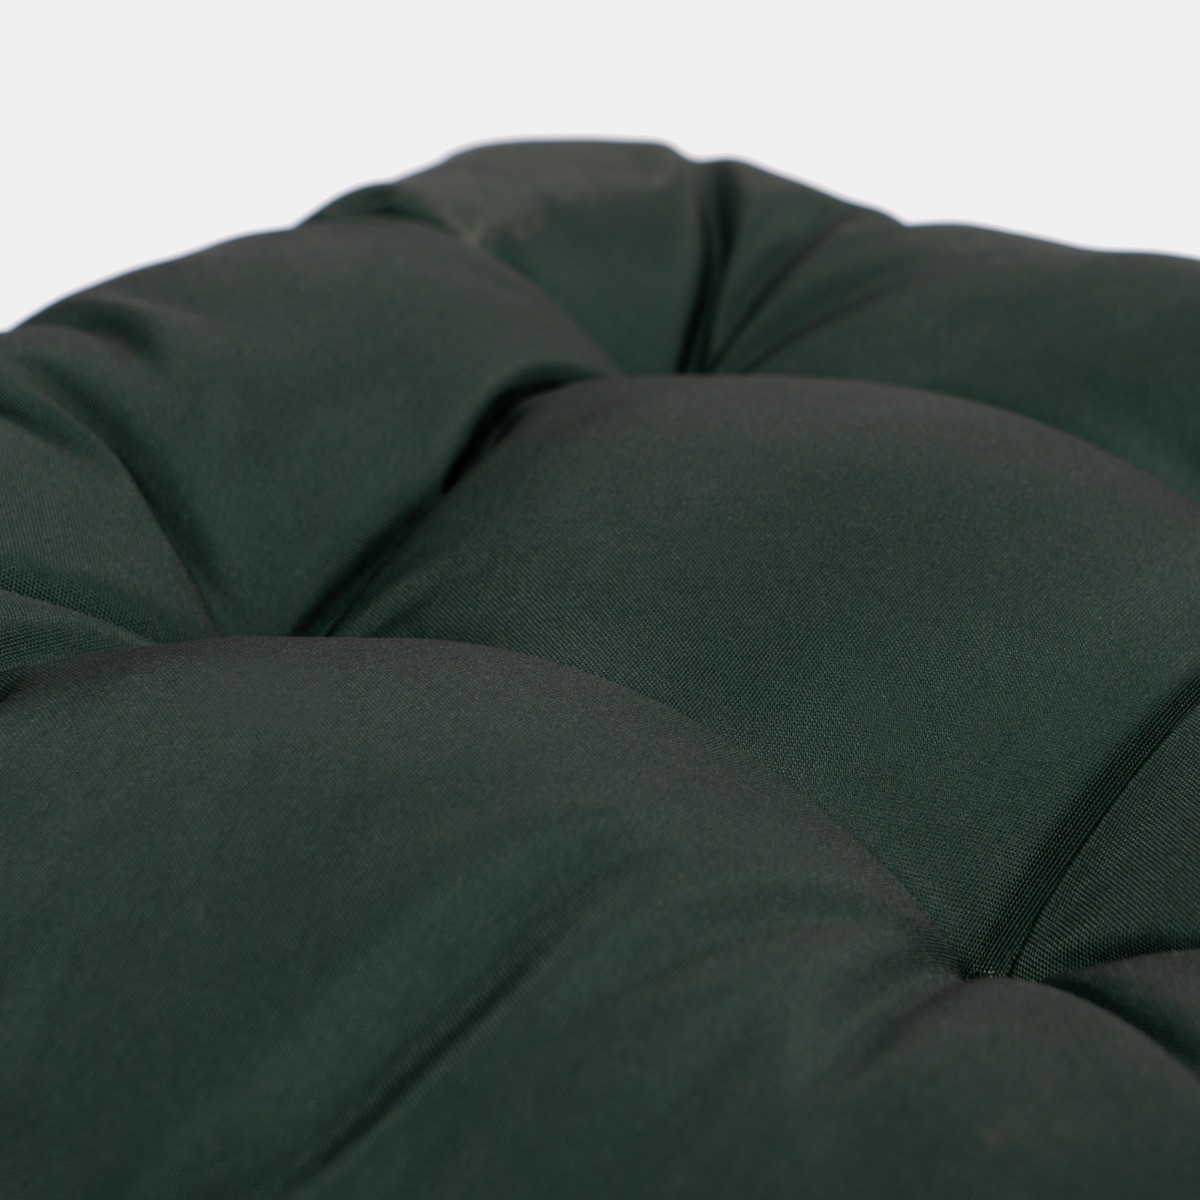 OHS Water Resistant Seat Pads - Forest Green>